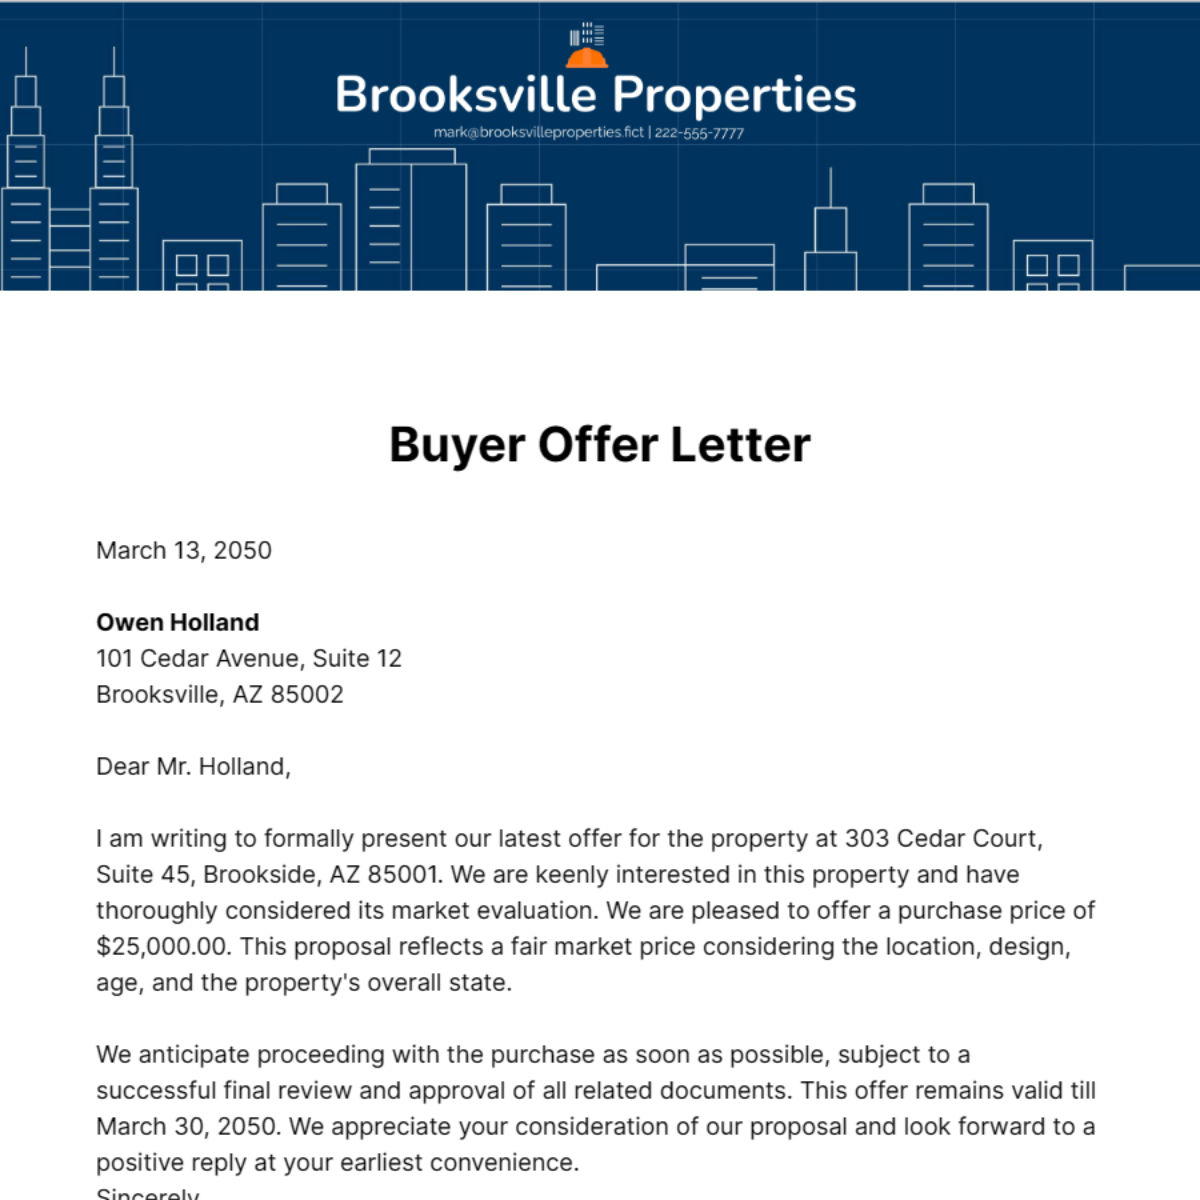 Buyer Offer Letter Template